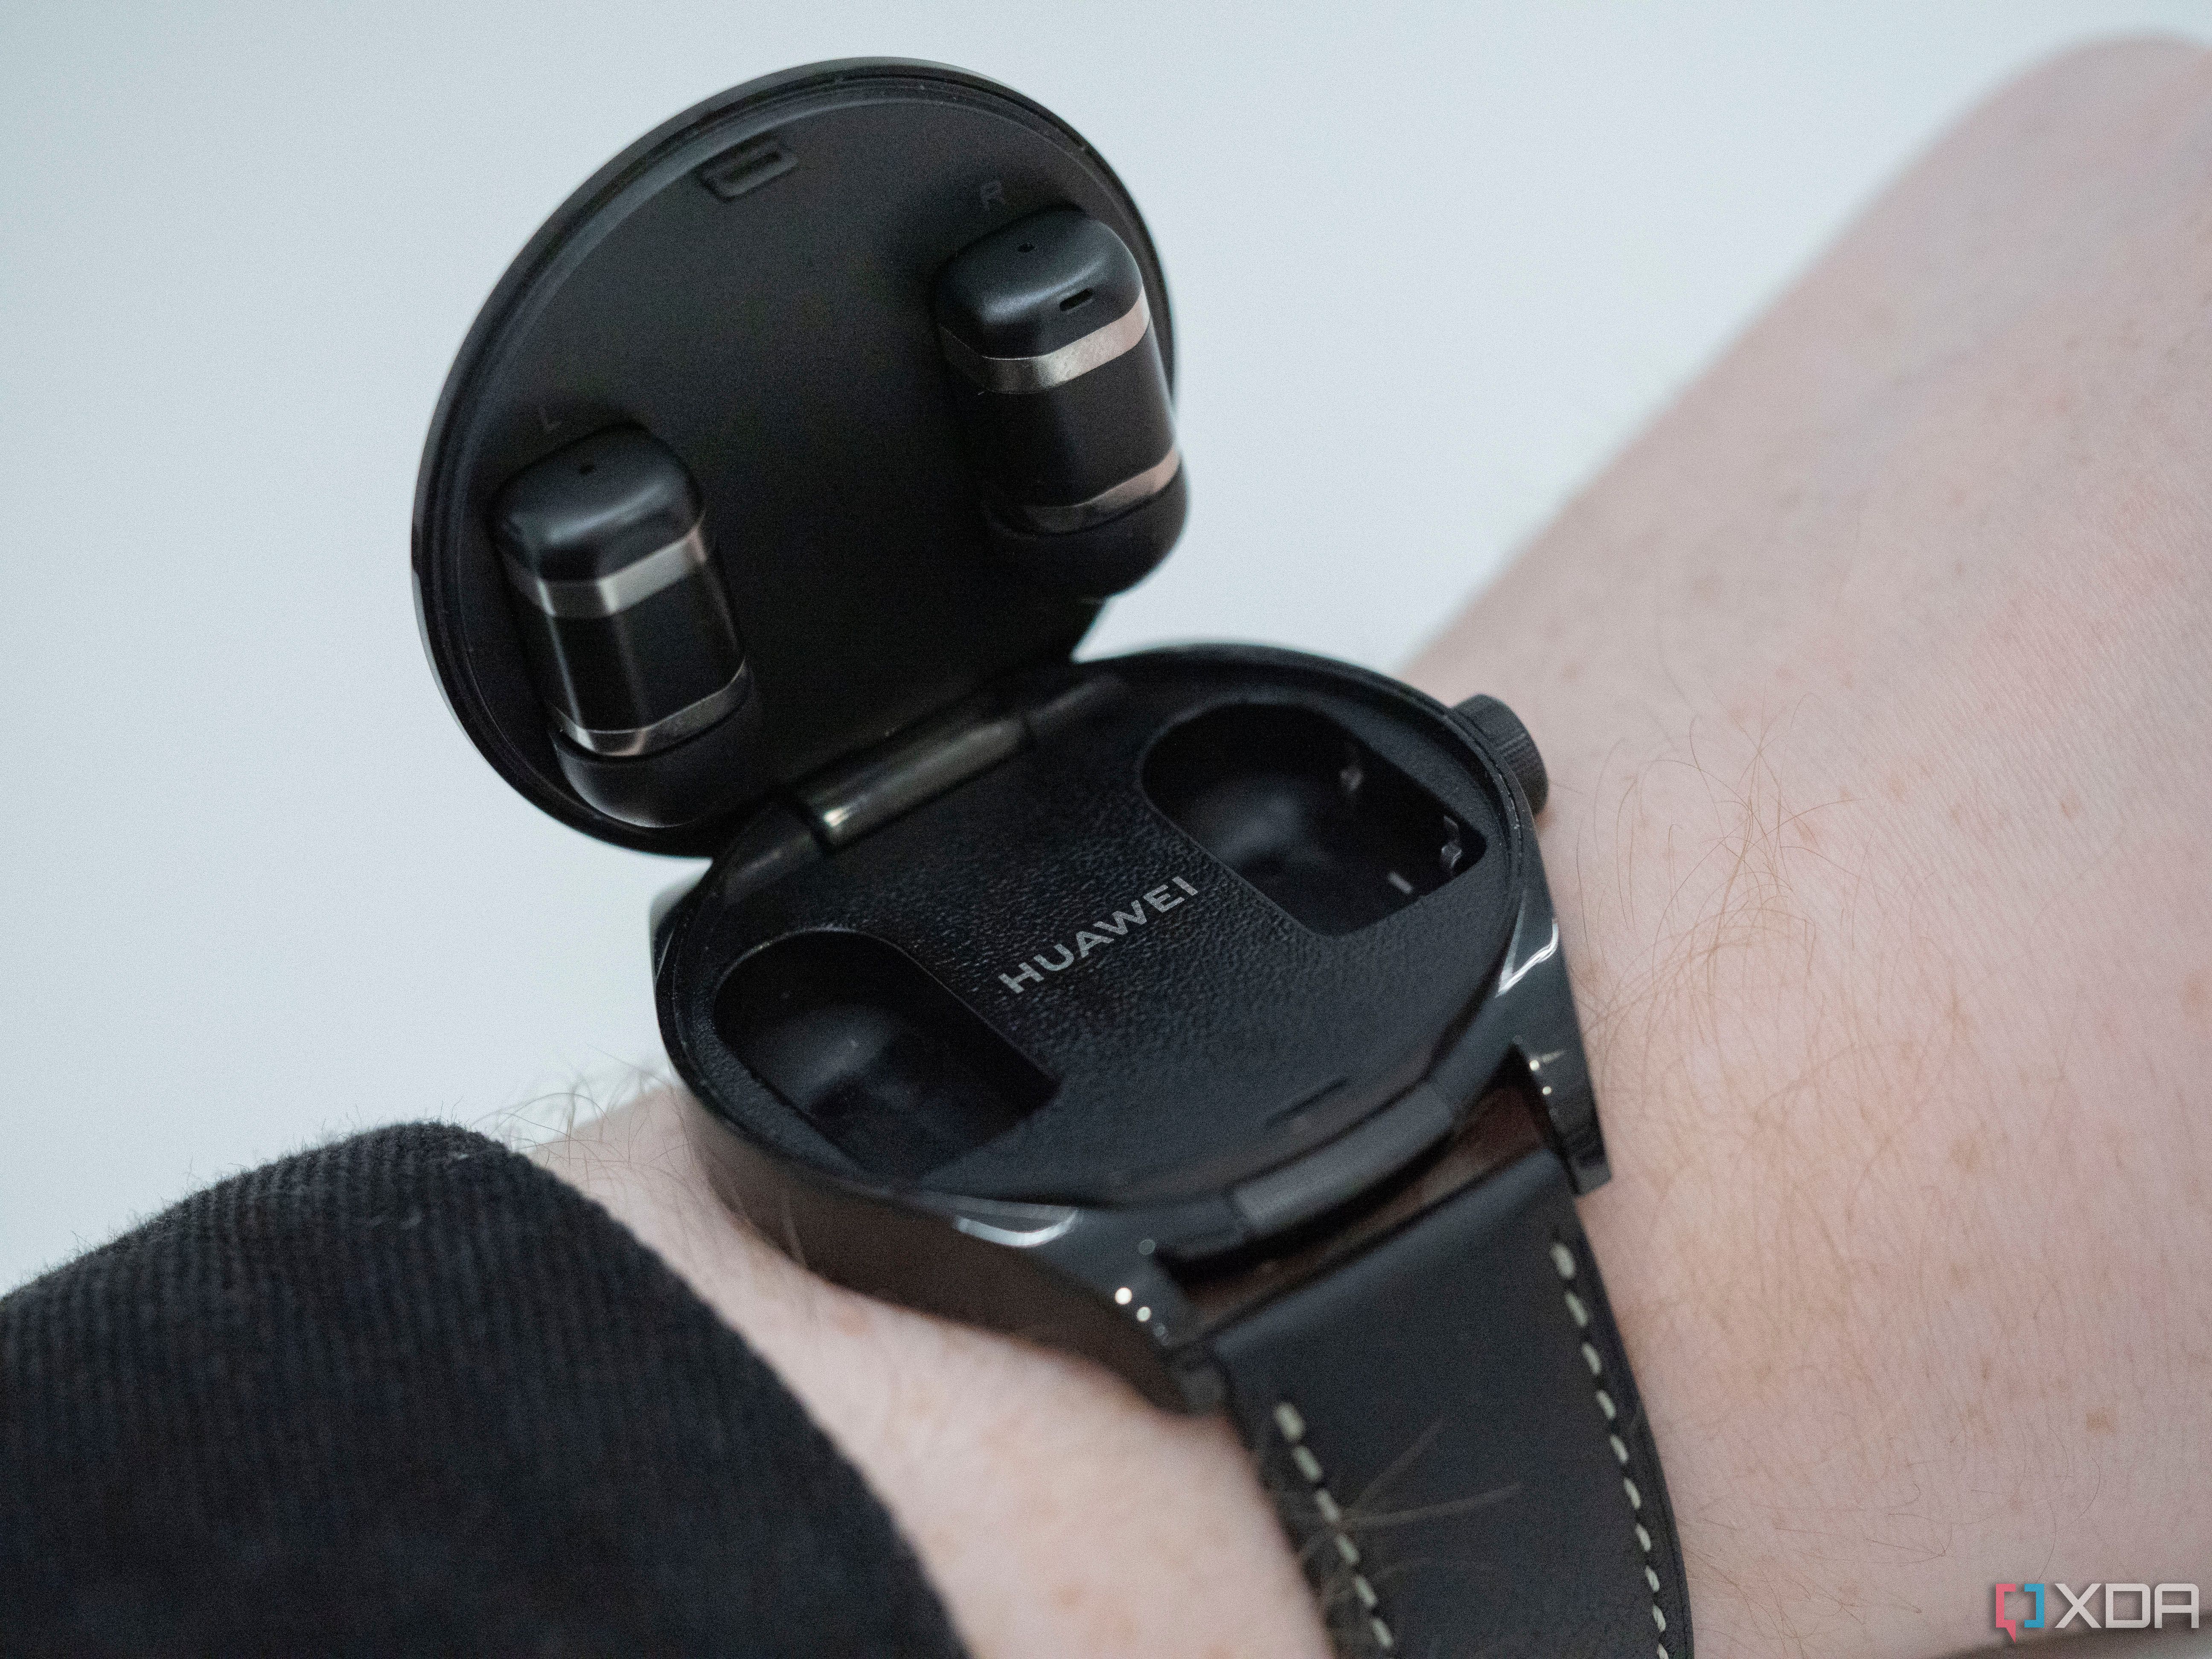 Huawei Watch Buds brings earbuds inside your smartwatch - Times of India